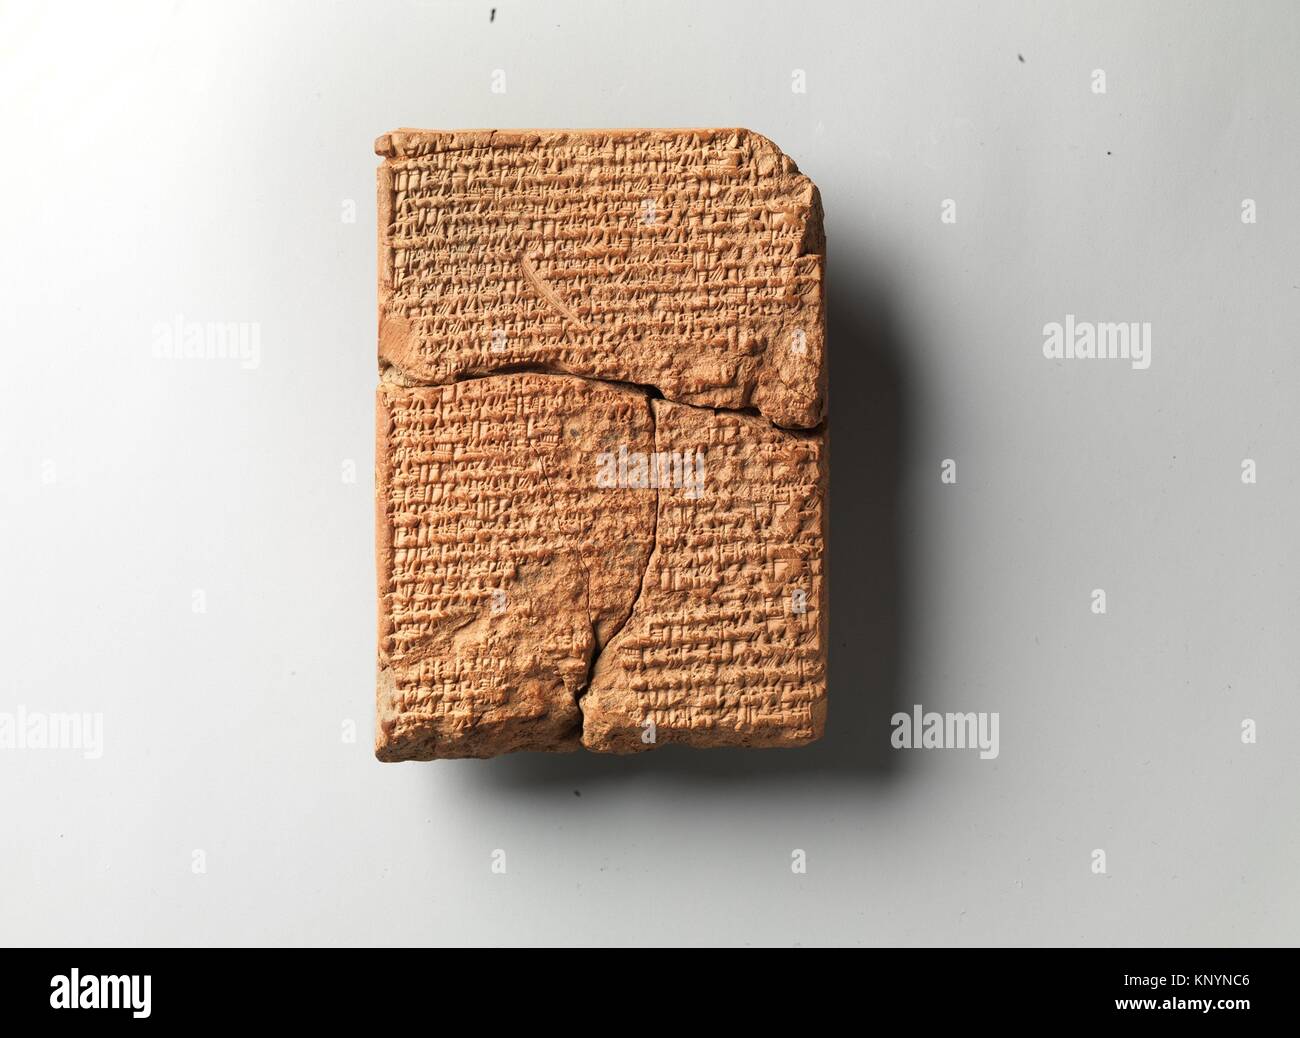 Cuneiform tablet: copy of record of entitlement and exemptions to formerly royal lands granted by the šatammu (high priest) of the Esangila temple. Stock Photo